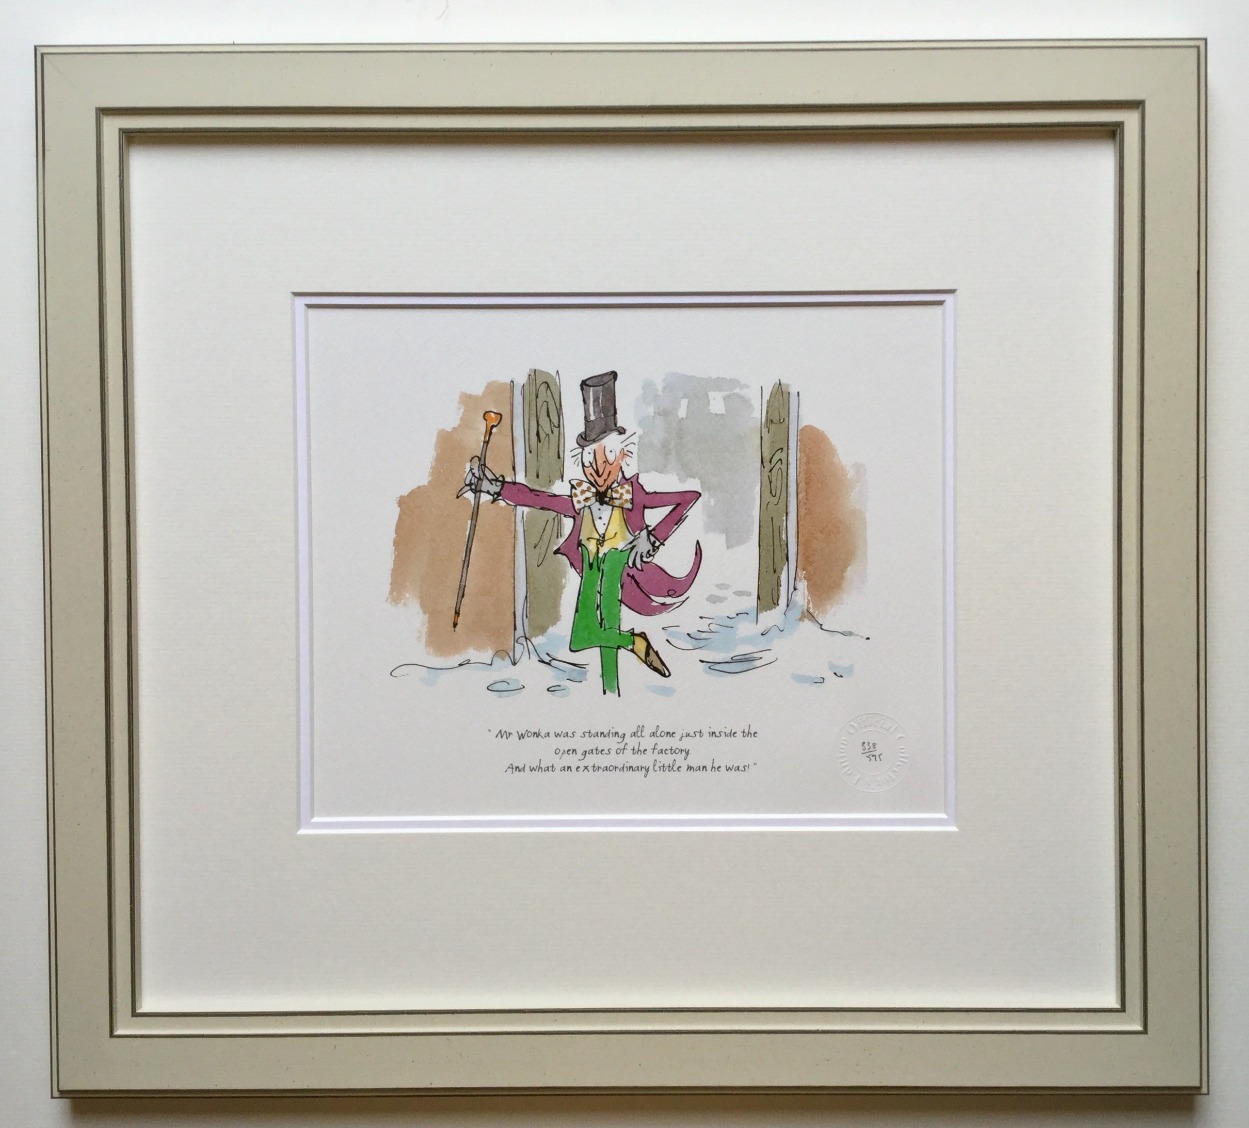 An extraordinary man he was by Quentin Blake